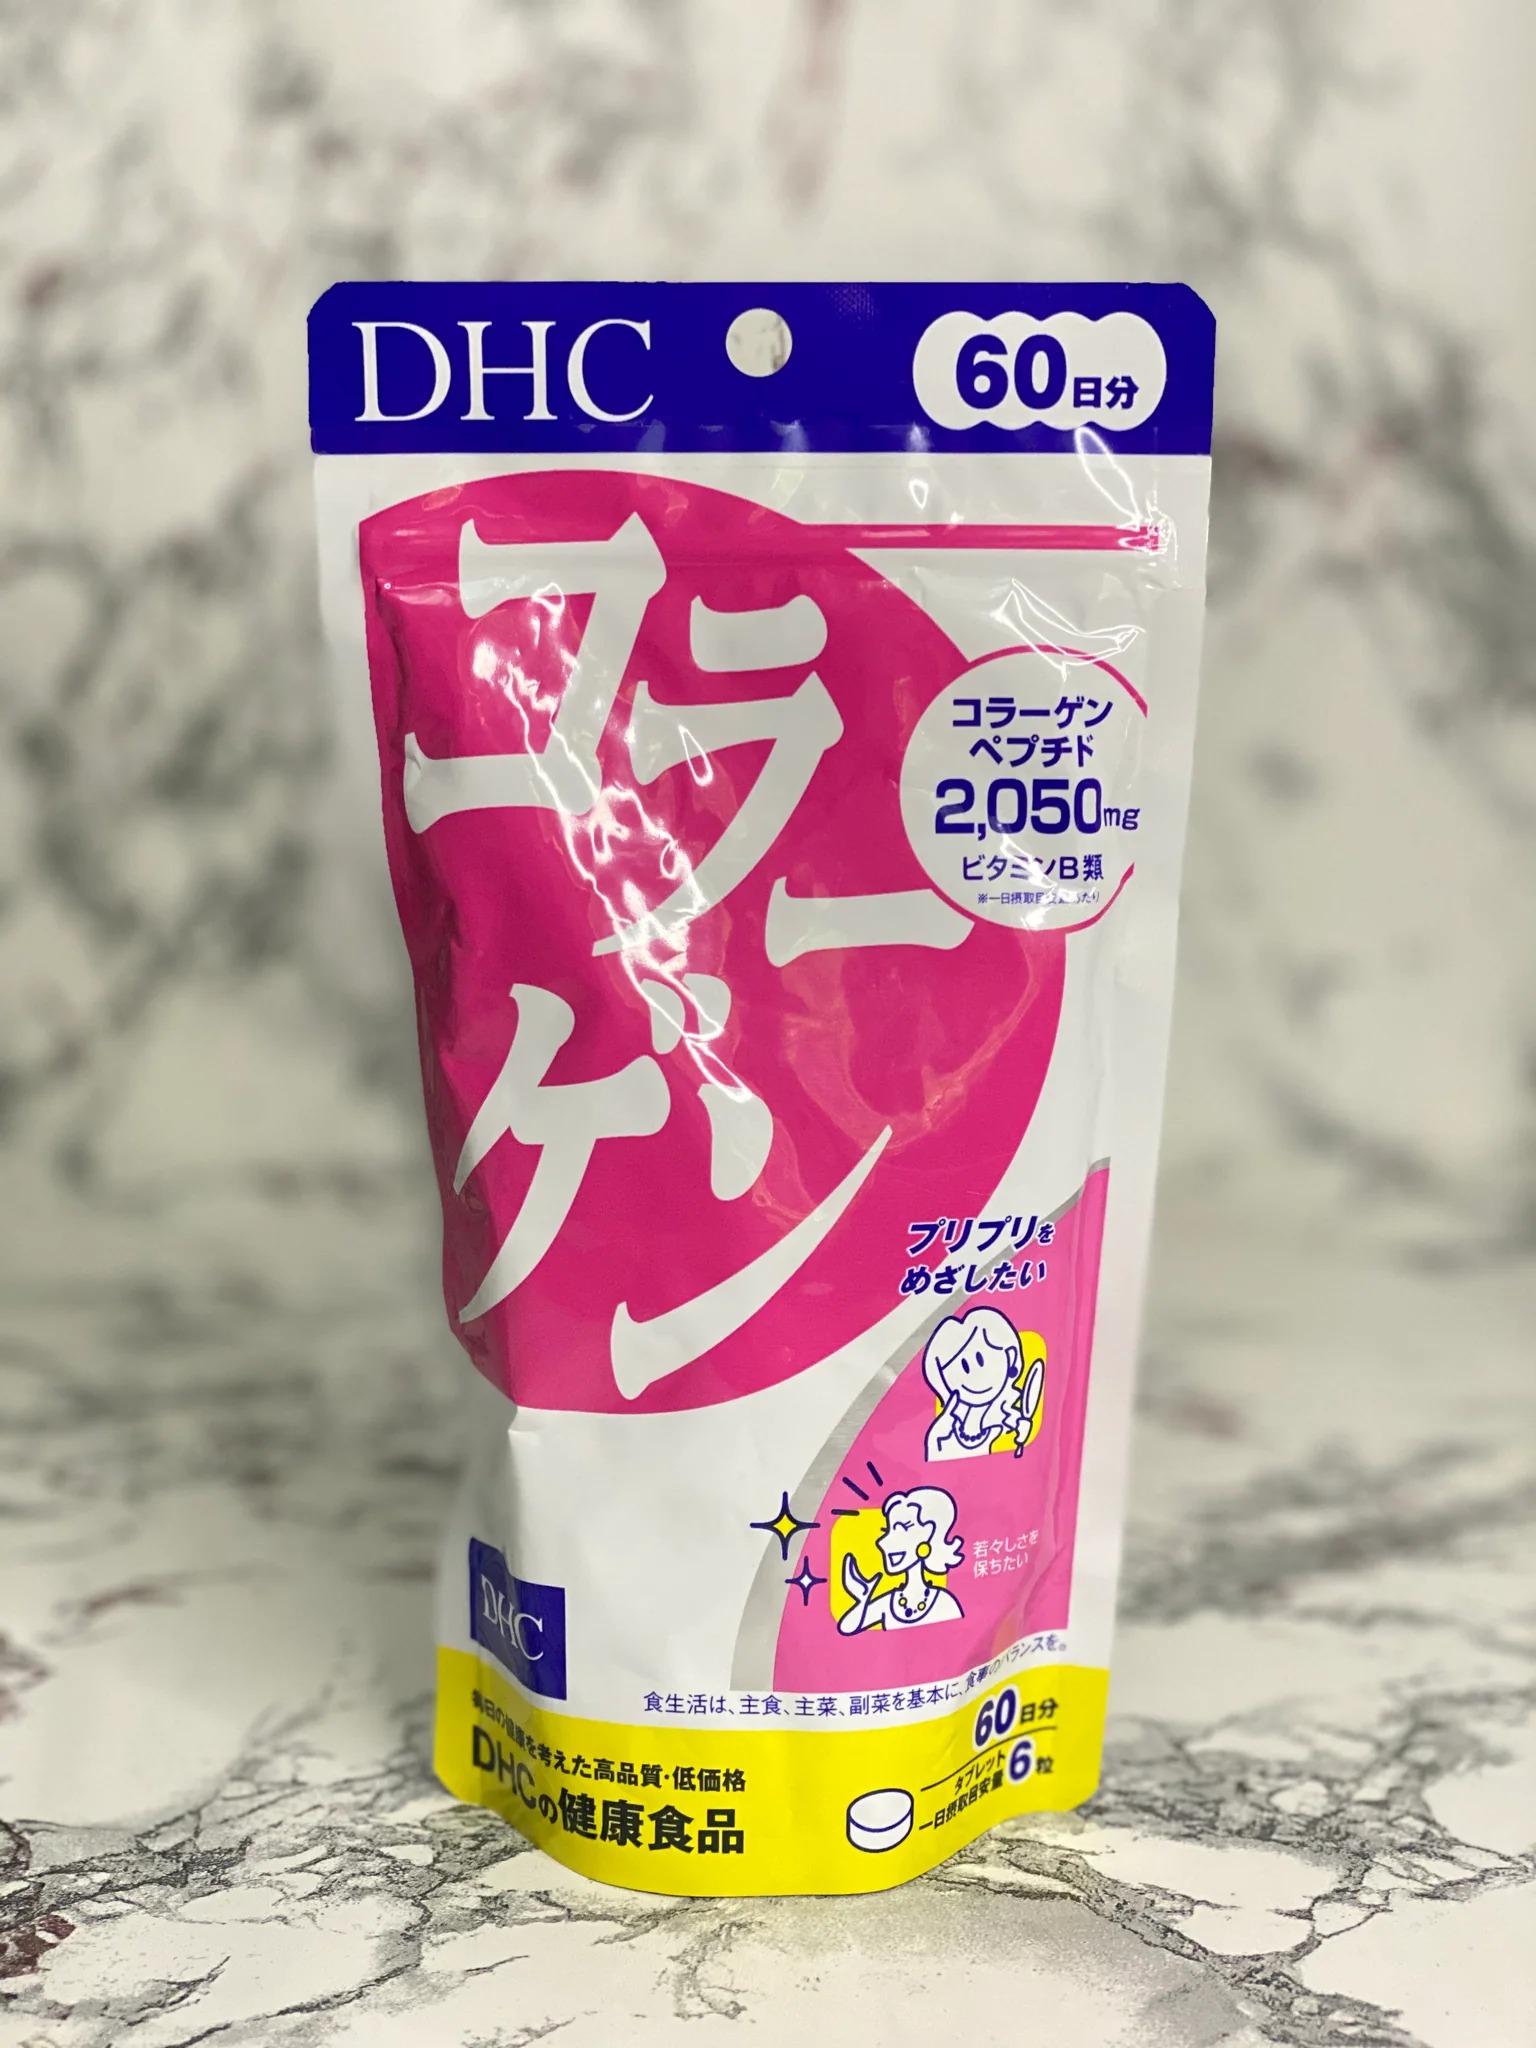 review vien uong dhc bo sung collagen 60 ngay mau moi